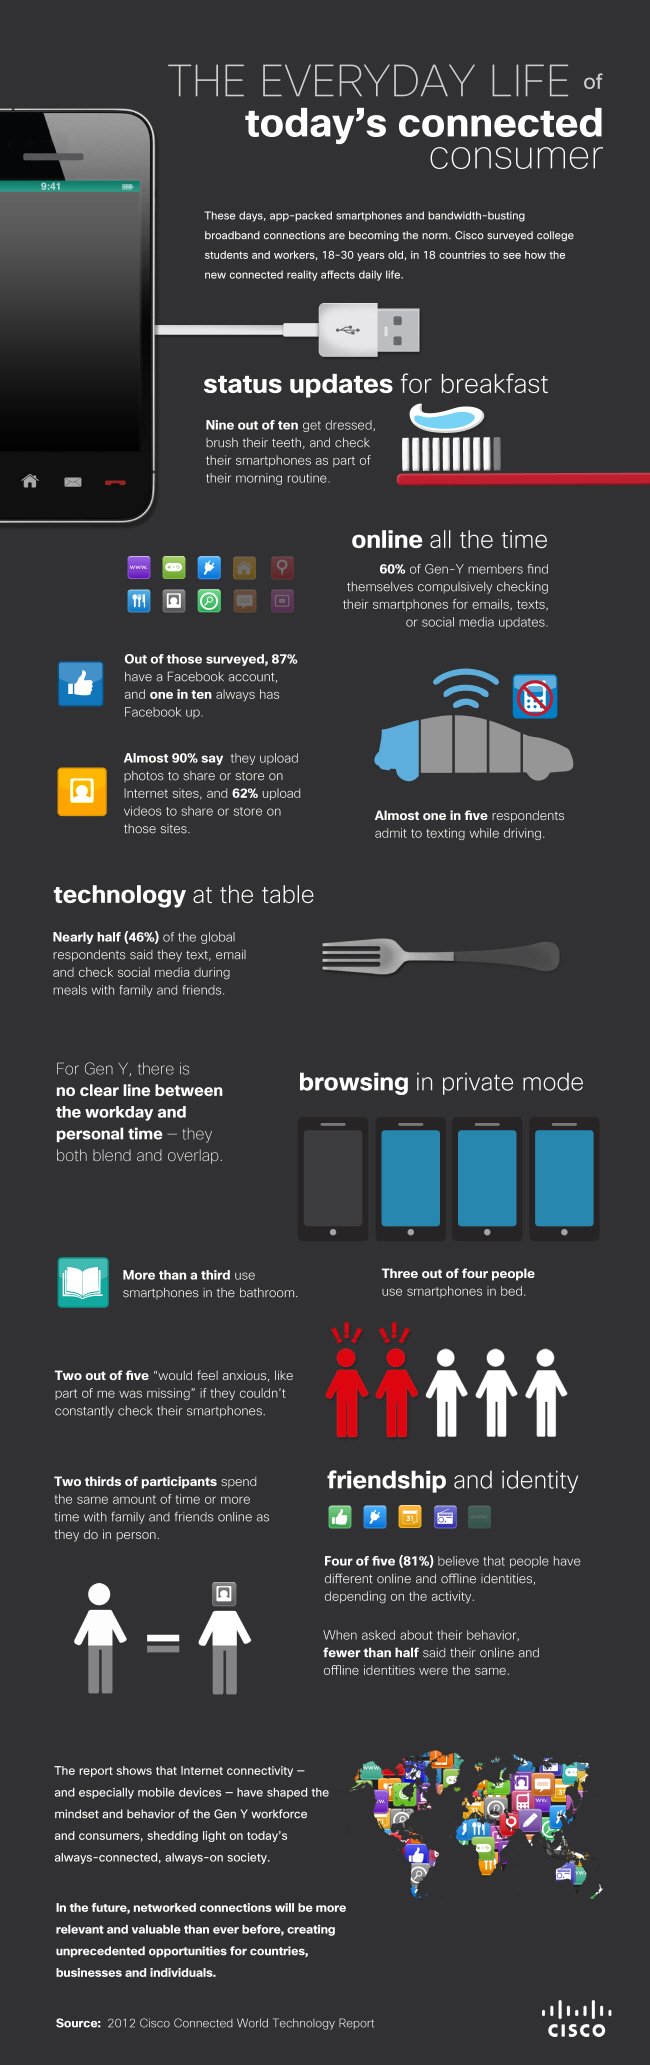 2012 Cisco Connected World Technology Report infographic